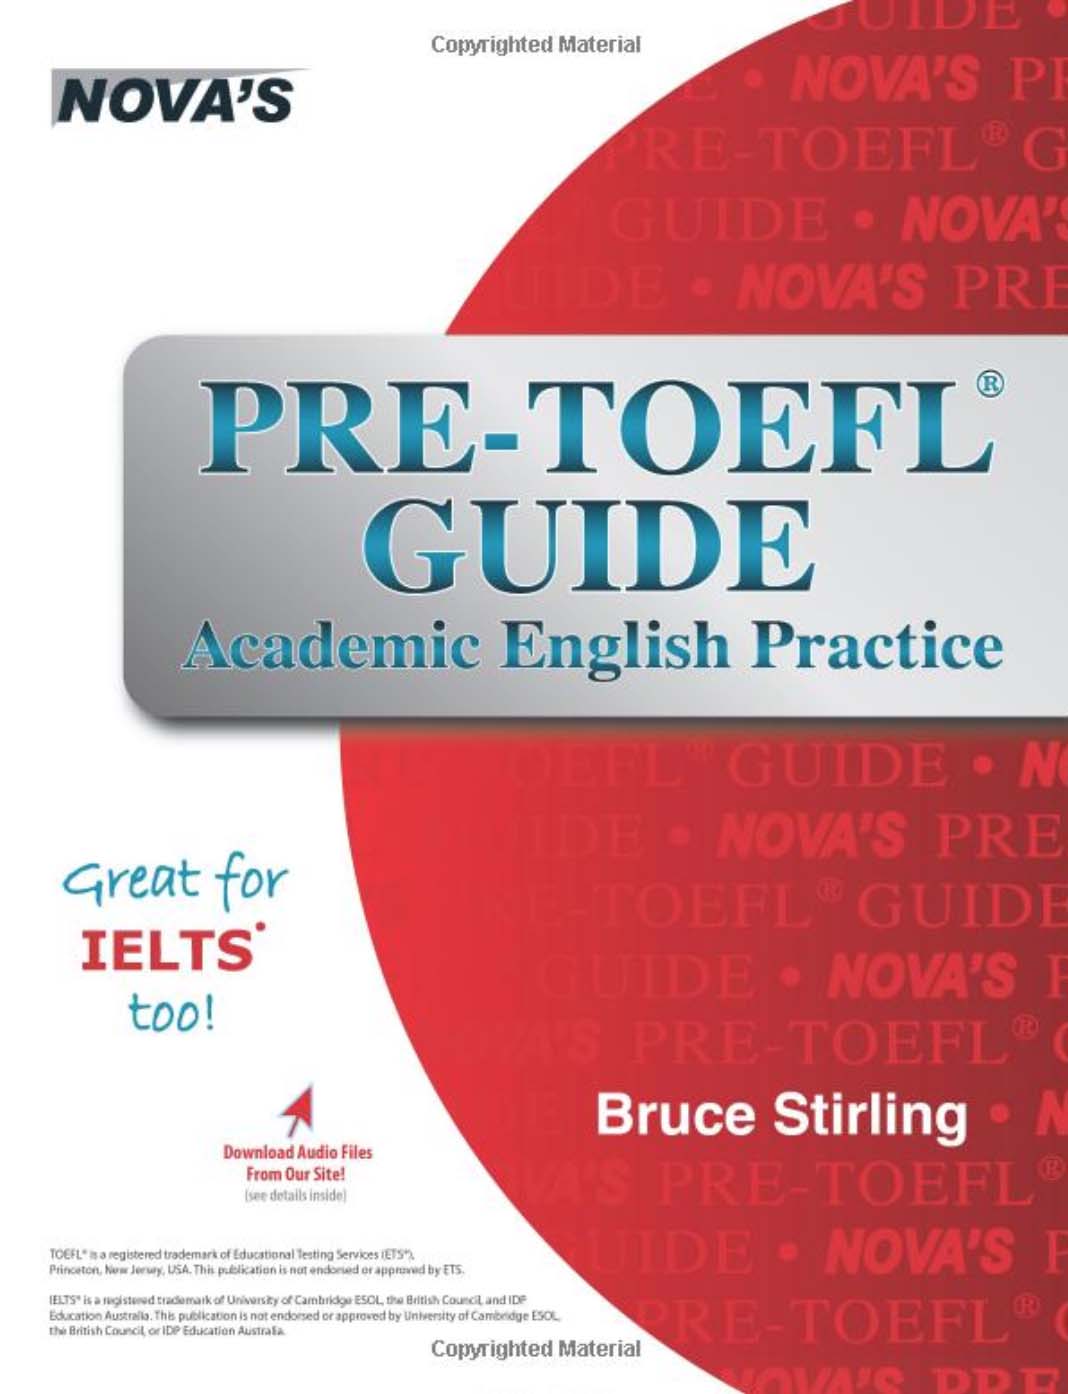 Pre-TOEFL Guide: Academic English Practice by Bruce Stirling